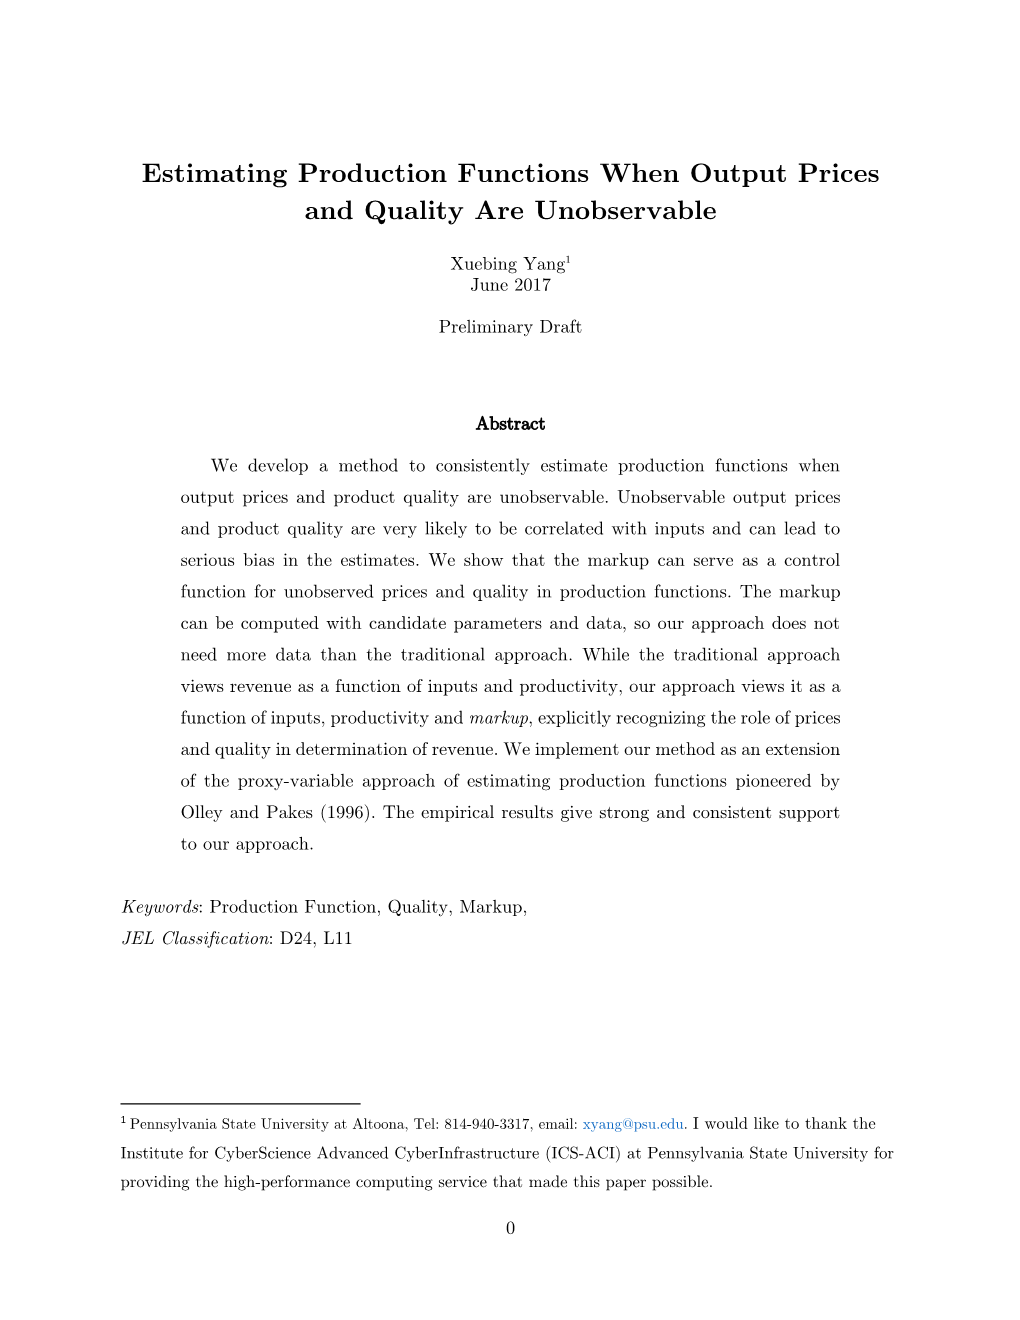 Estimating Production Functions When Output Prices and Quality Are Unobservable